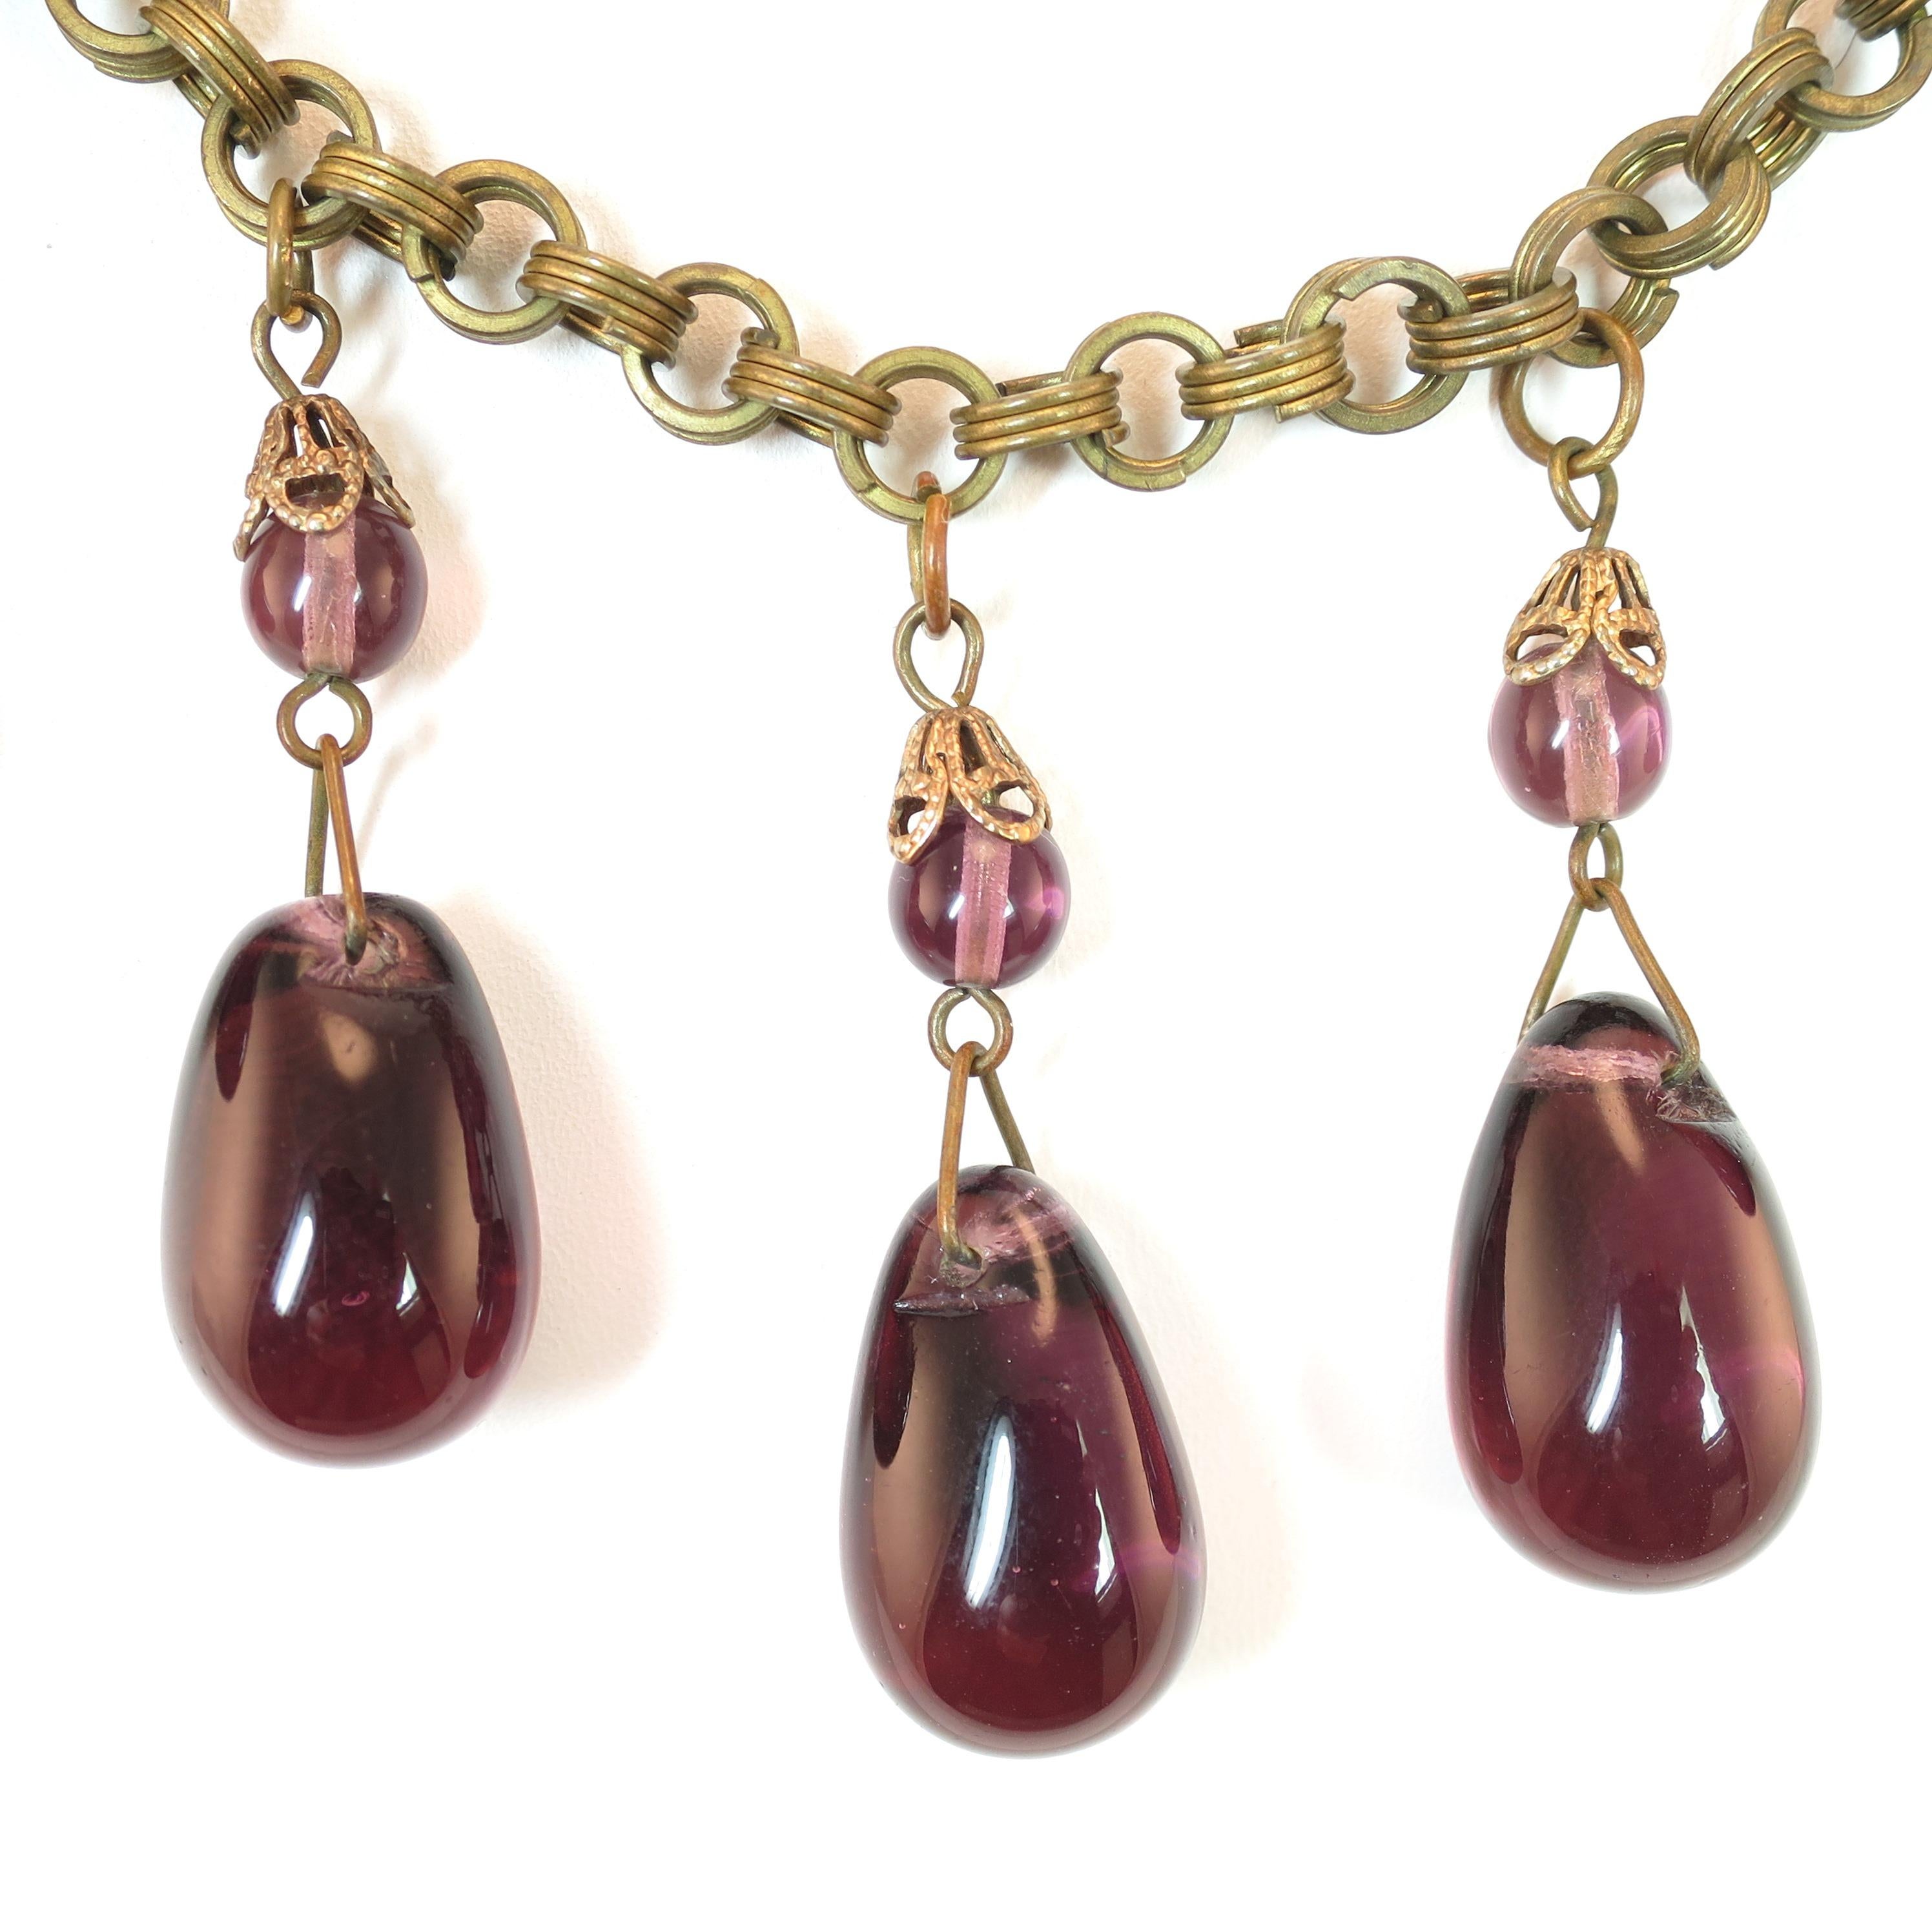 Victorian French Amethyst Poured Glass & Chain Link Necklace, 1870s In Good Condition For Sale In Burbank, CA